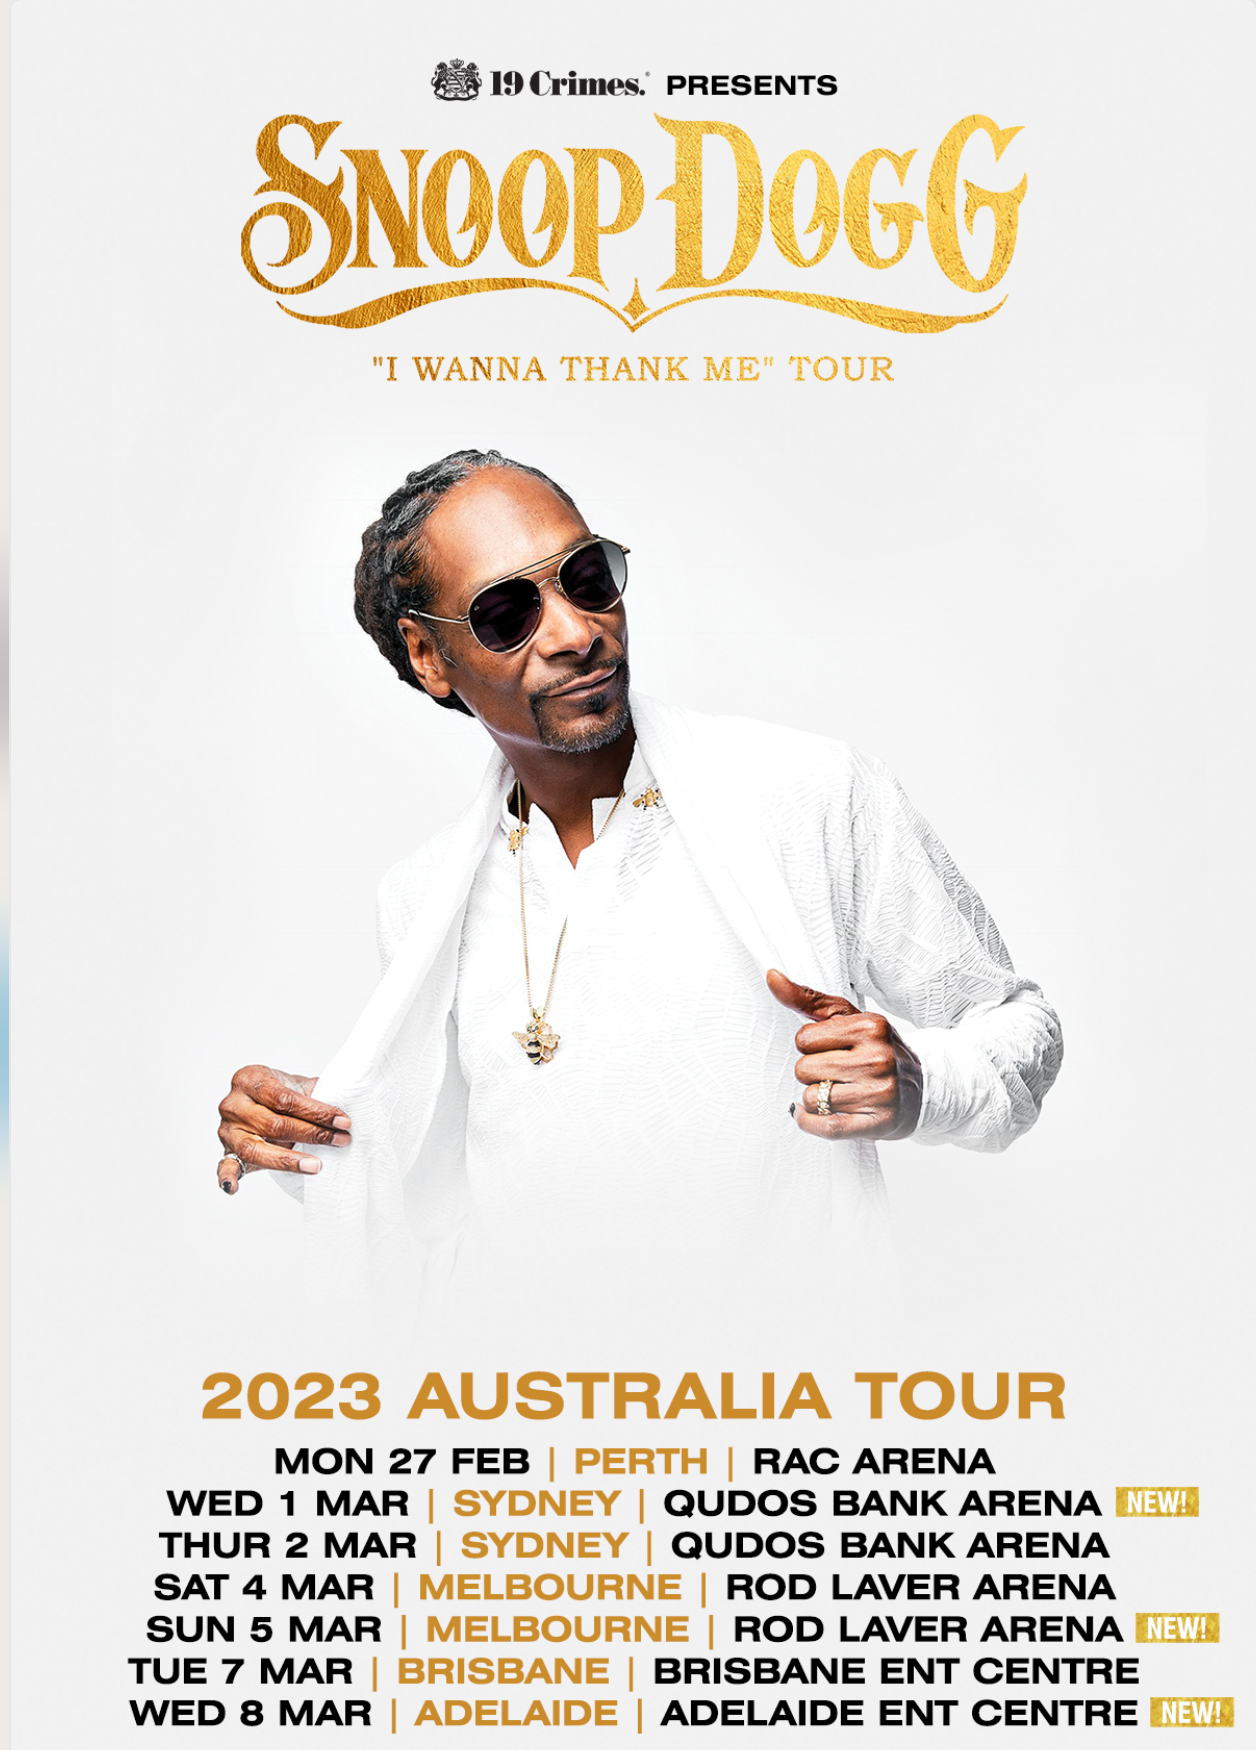 who is on tour with snoop dogg 2023